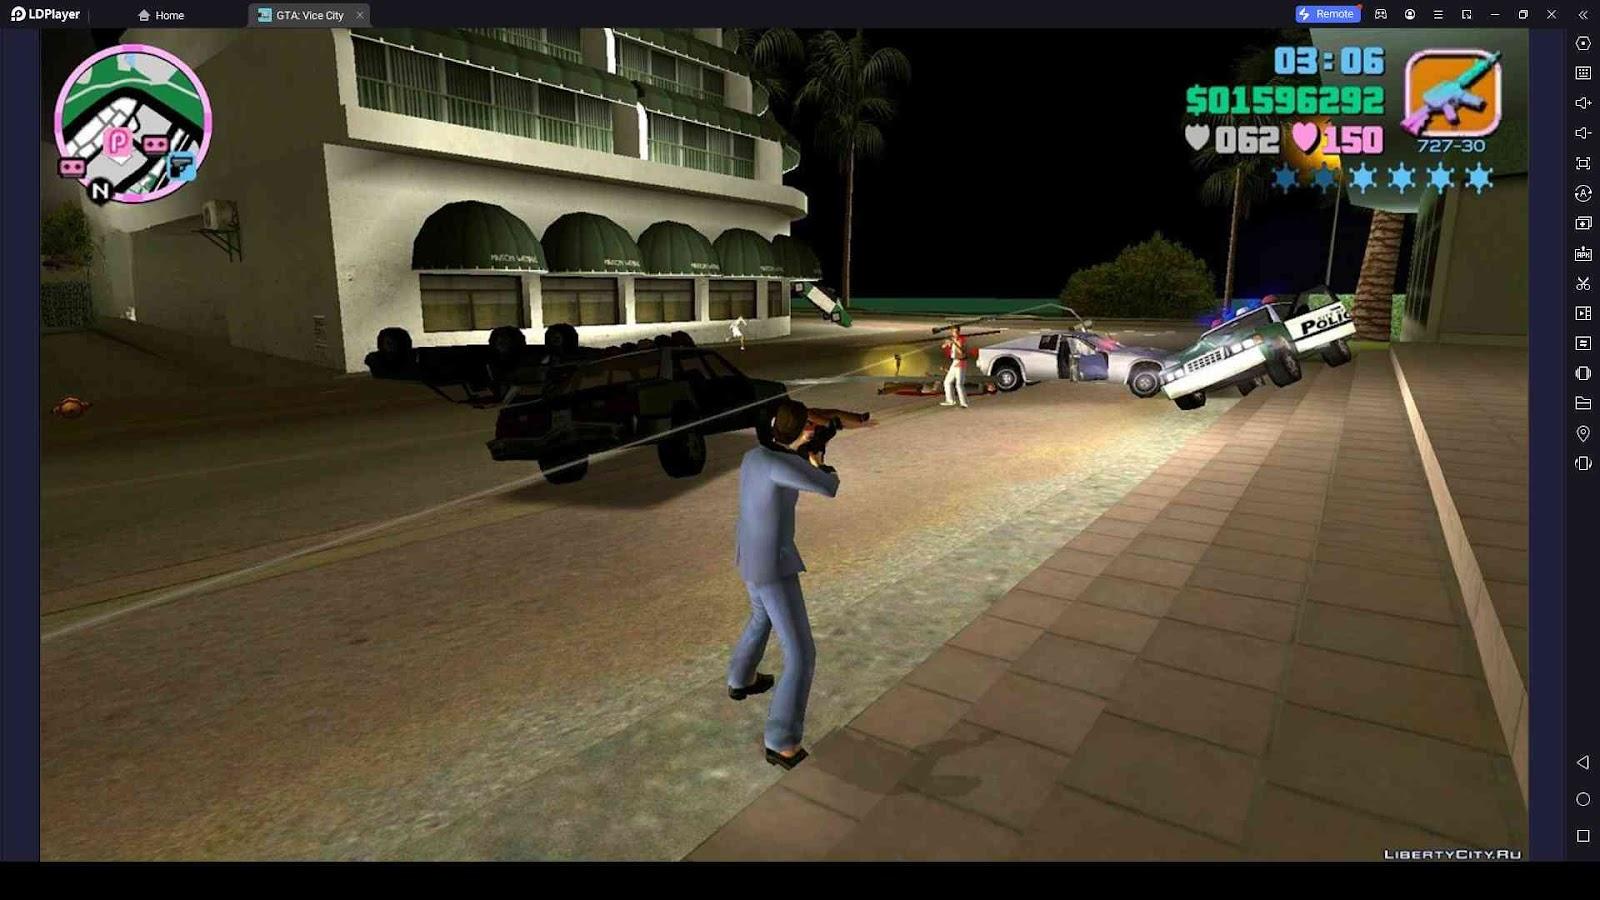 How to Avoid Being Wanted in GTA: Vice City – NETFLIX